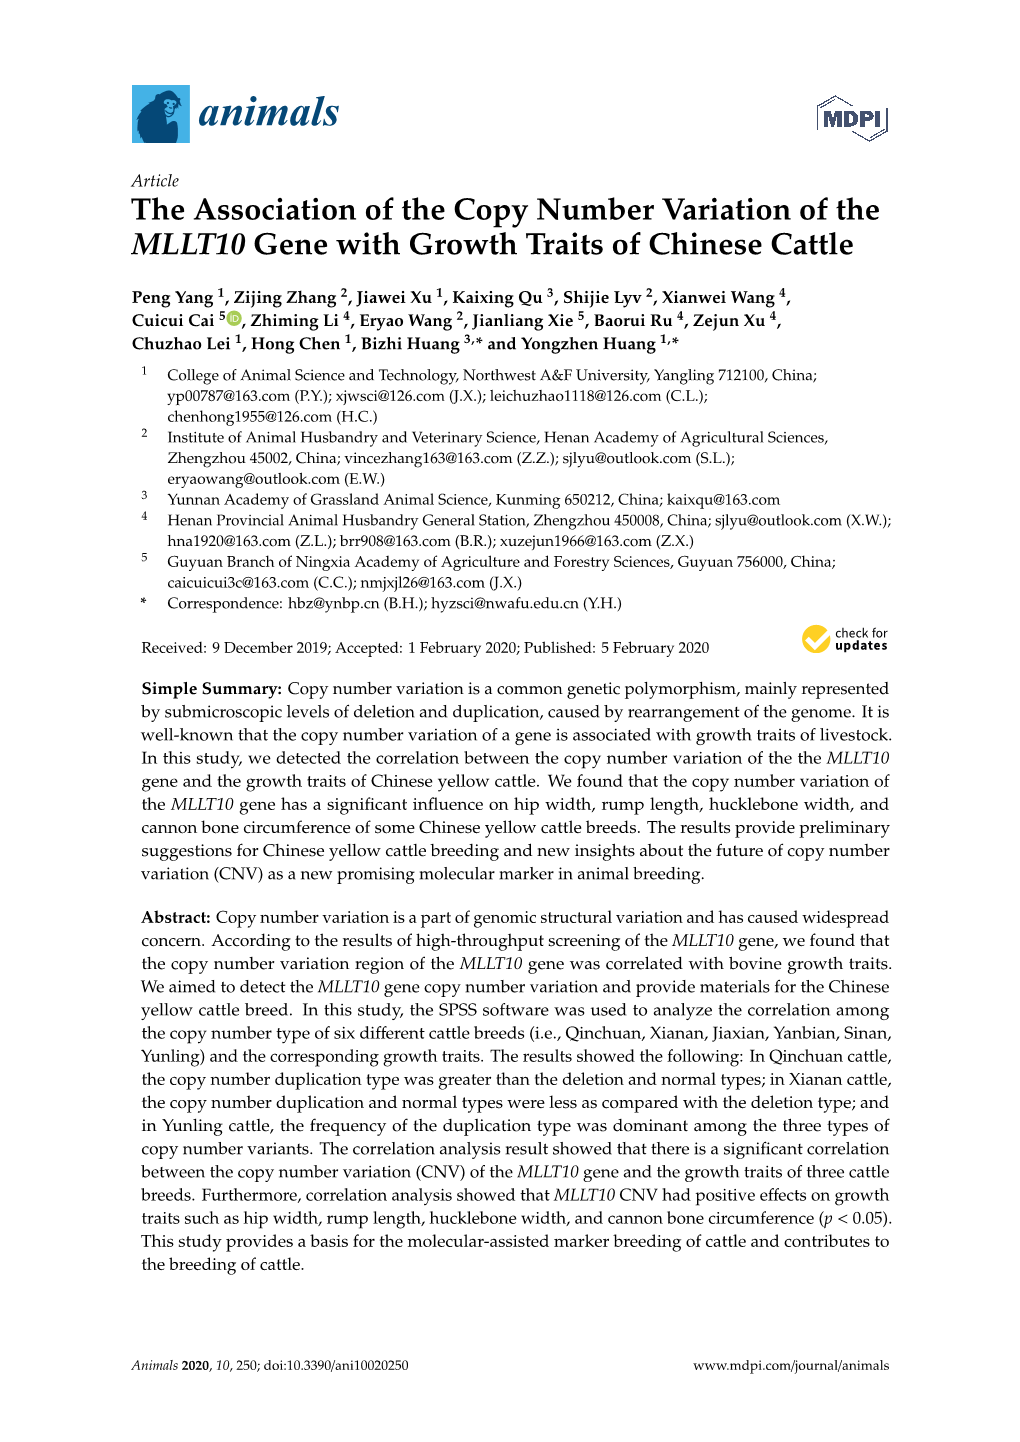 The Association of the Copy Number Variation of the MLLT10 Gene with Growth Traits of Chinese Cattle